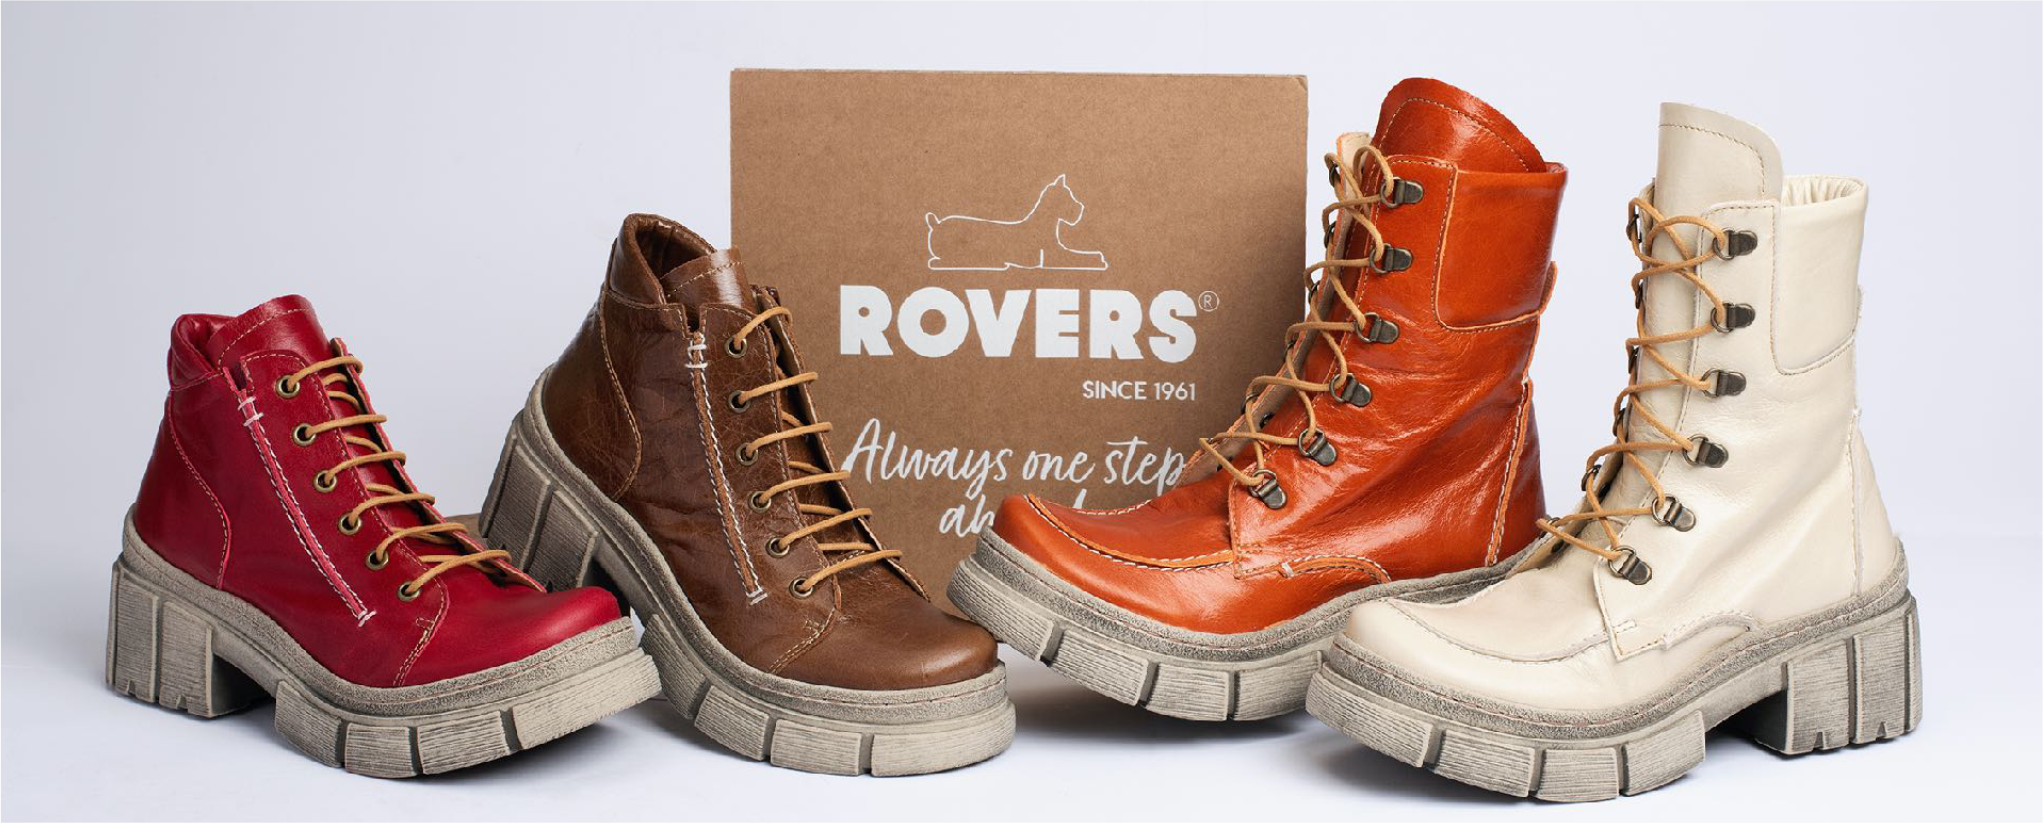 OFFICIAL ROVERS SHOES – Allways one step ahead